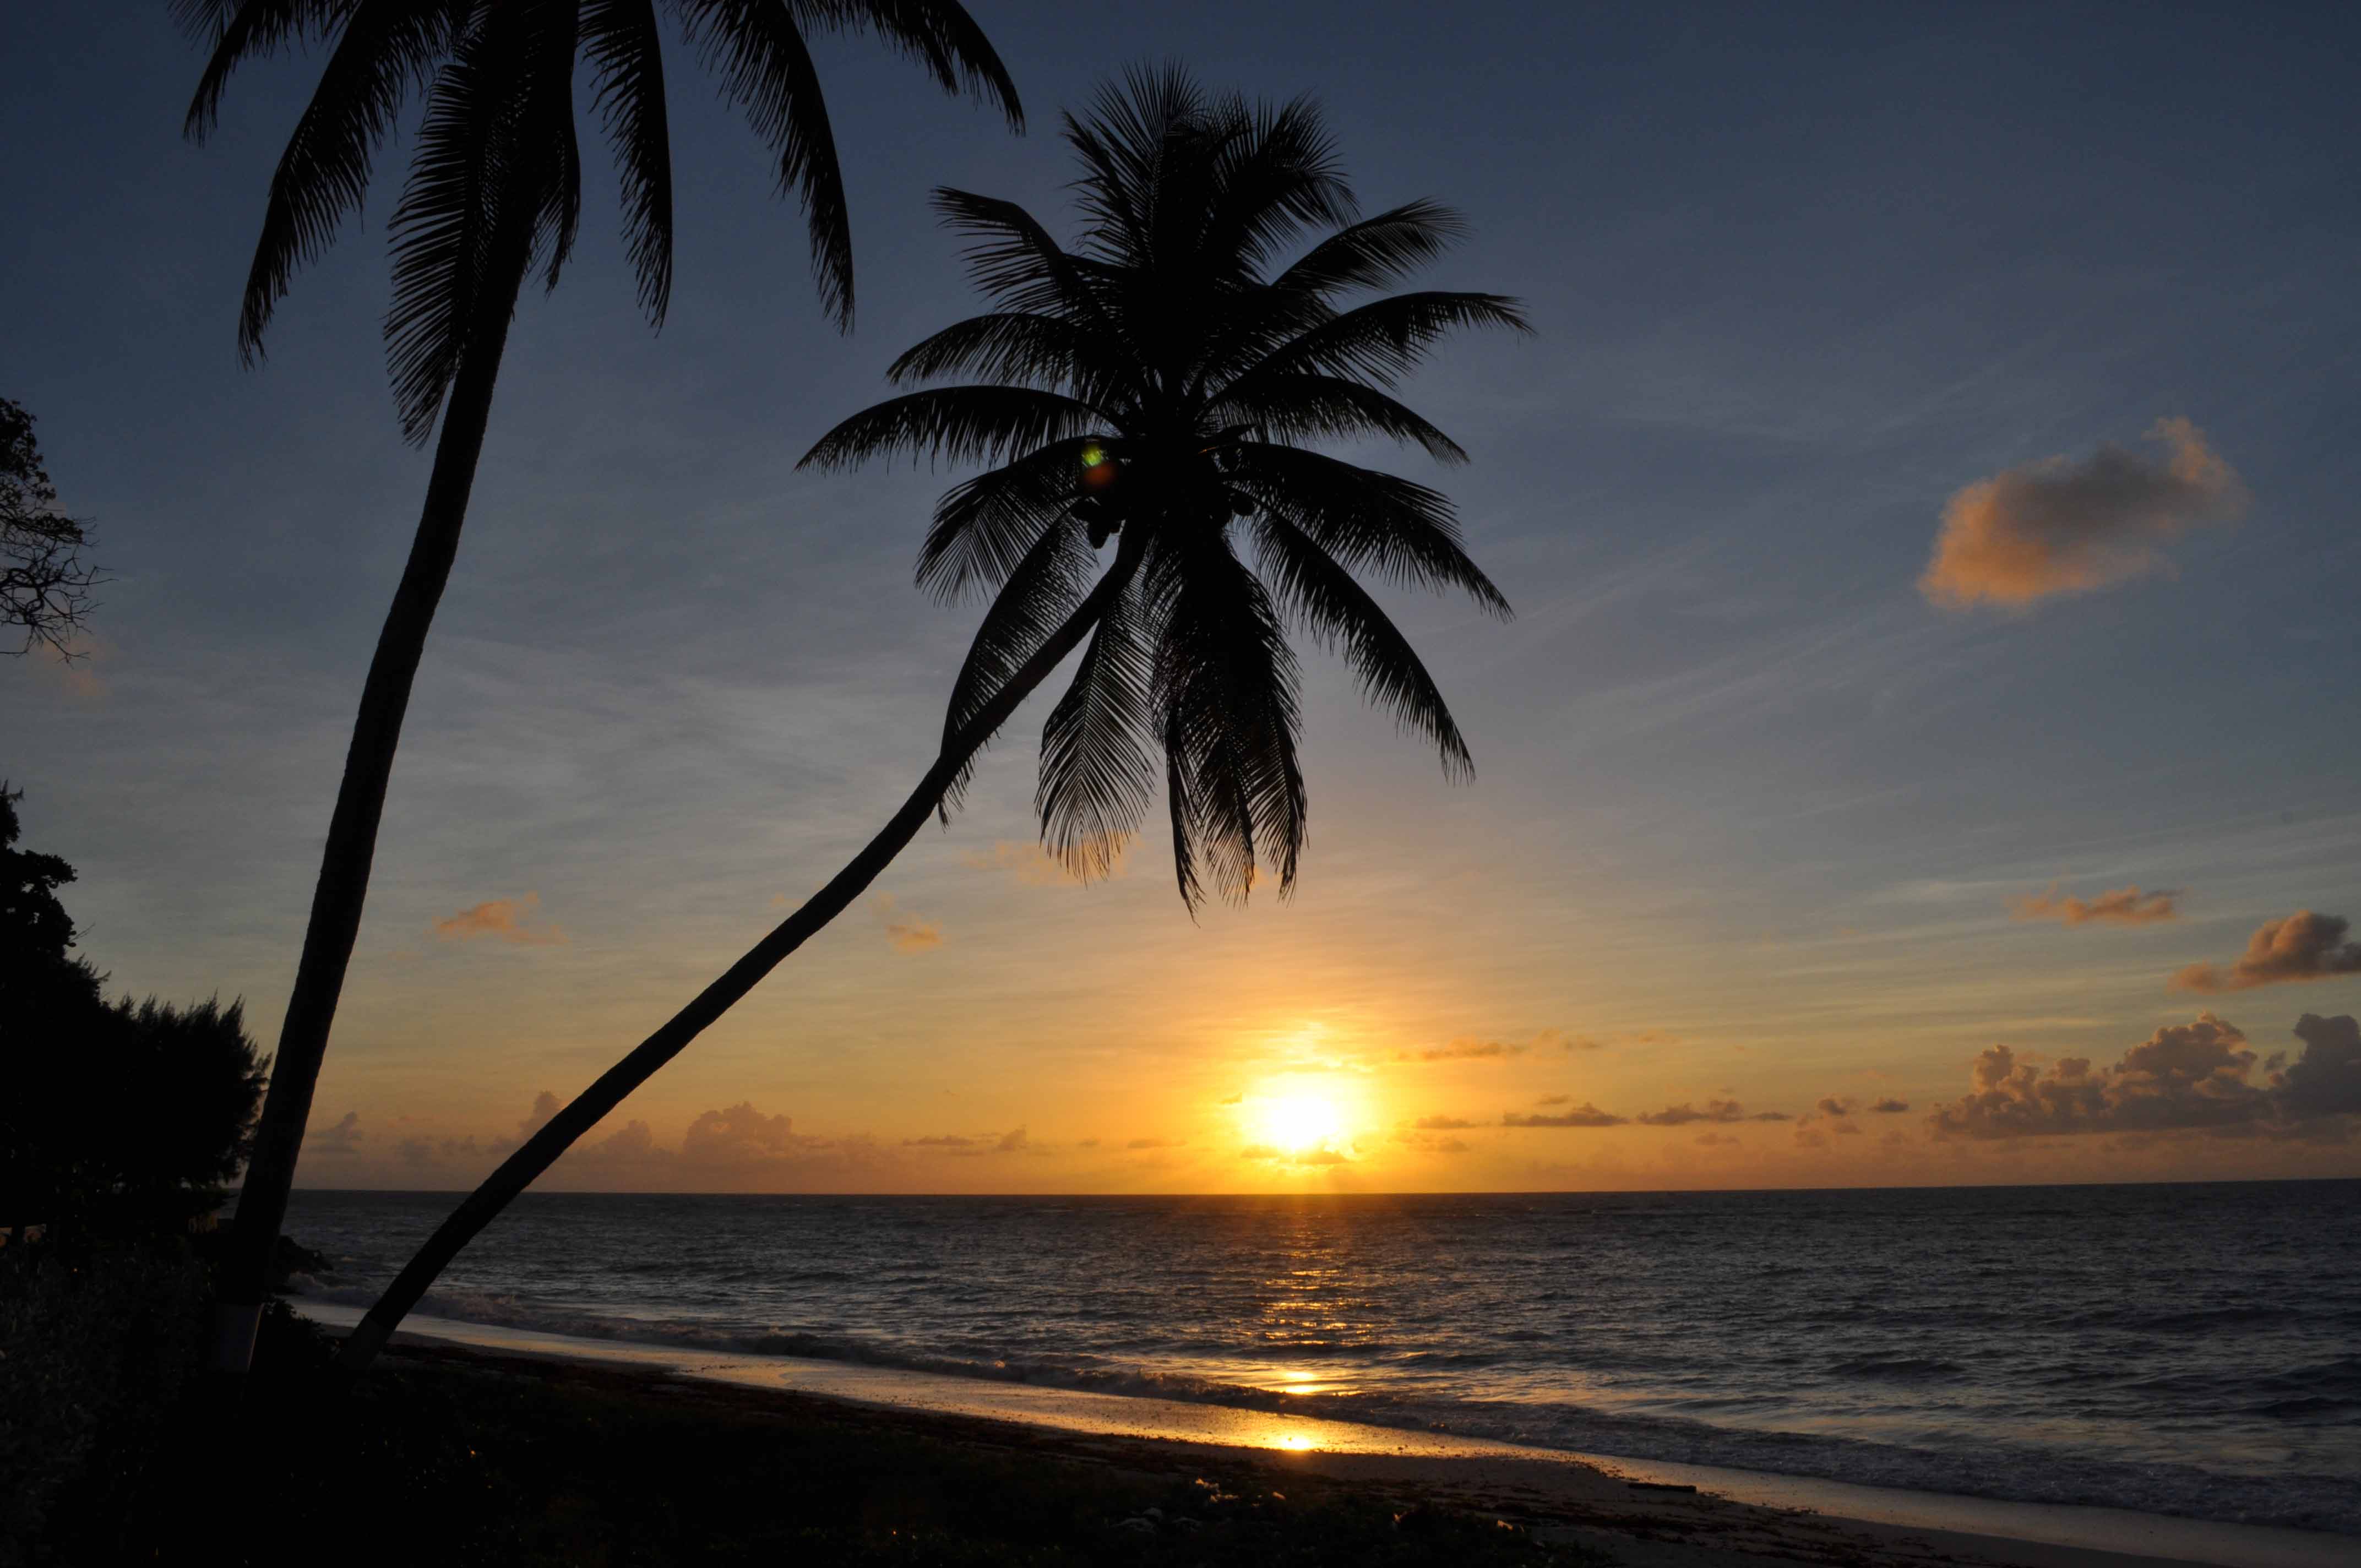 Sunrise at Silver Sands Beach - BARBADOS